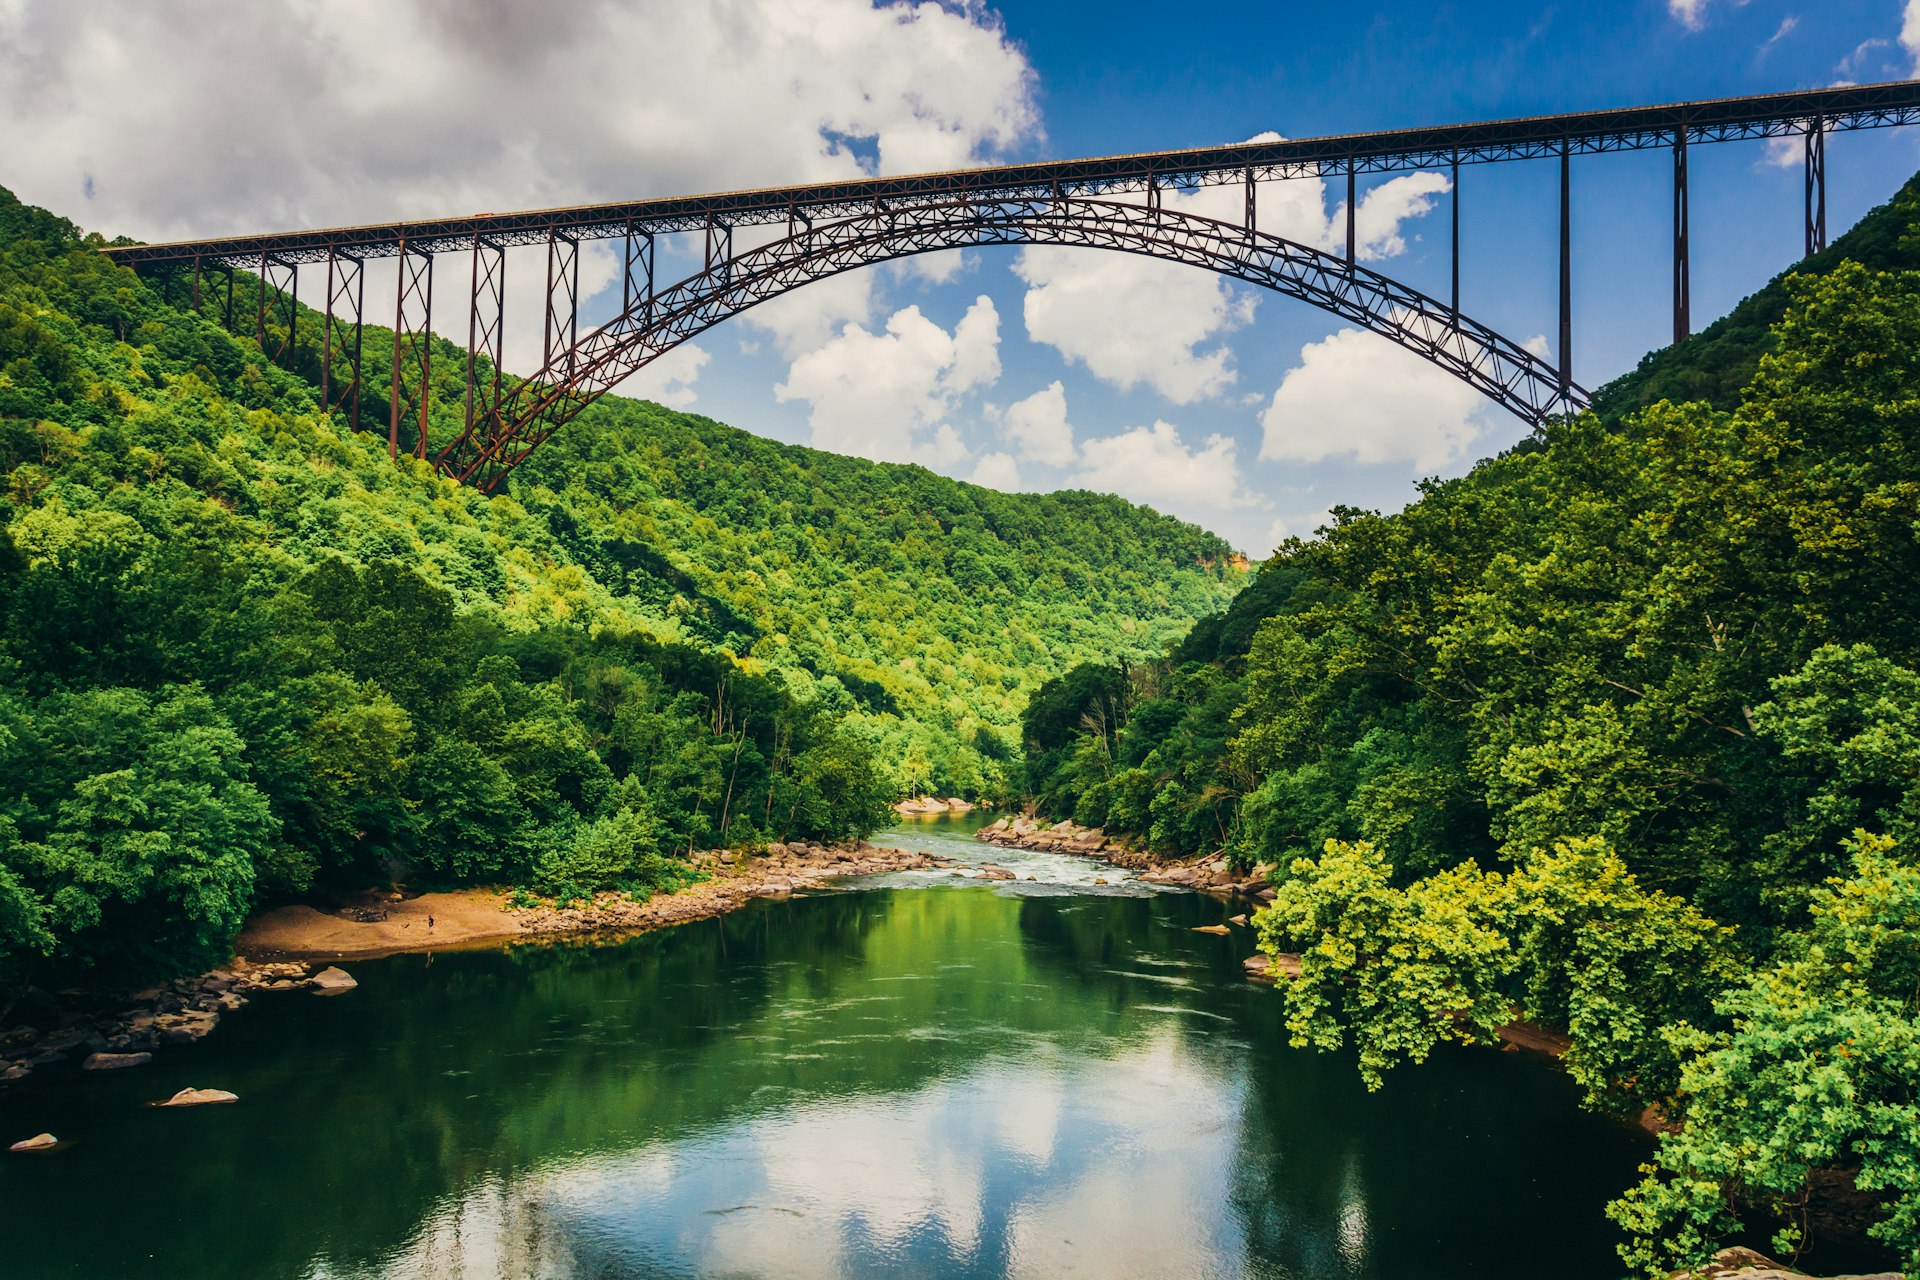 The New River Gorge Bridge, as seen from Fayette Station Road on a partly cloudy day, with lush greenery on either shore